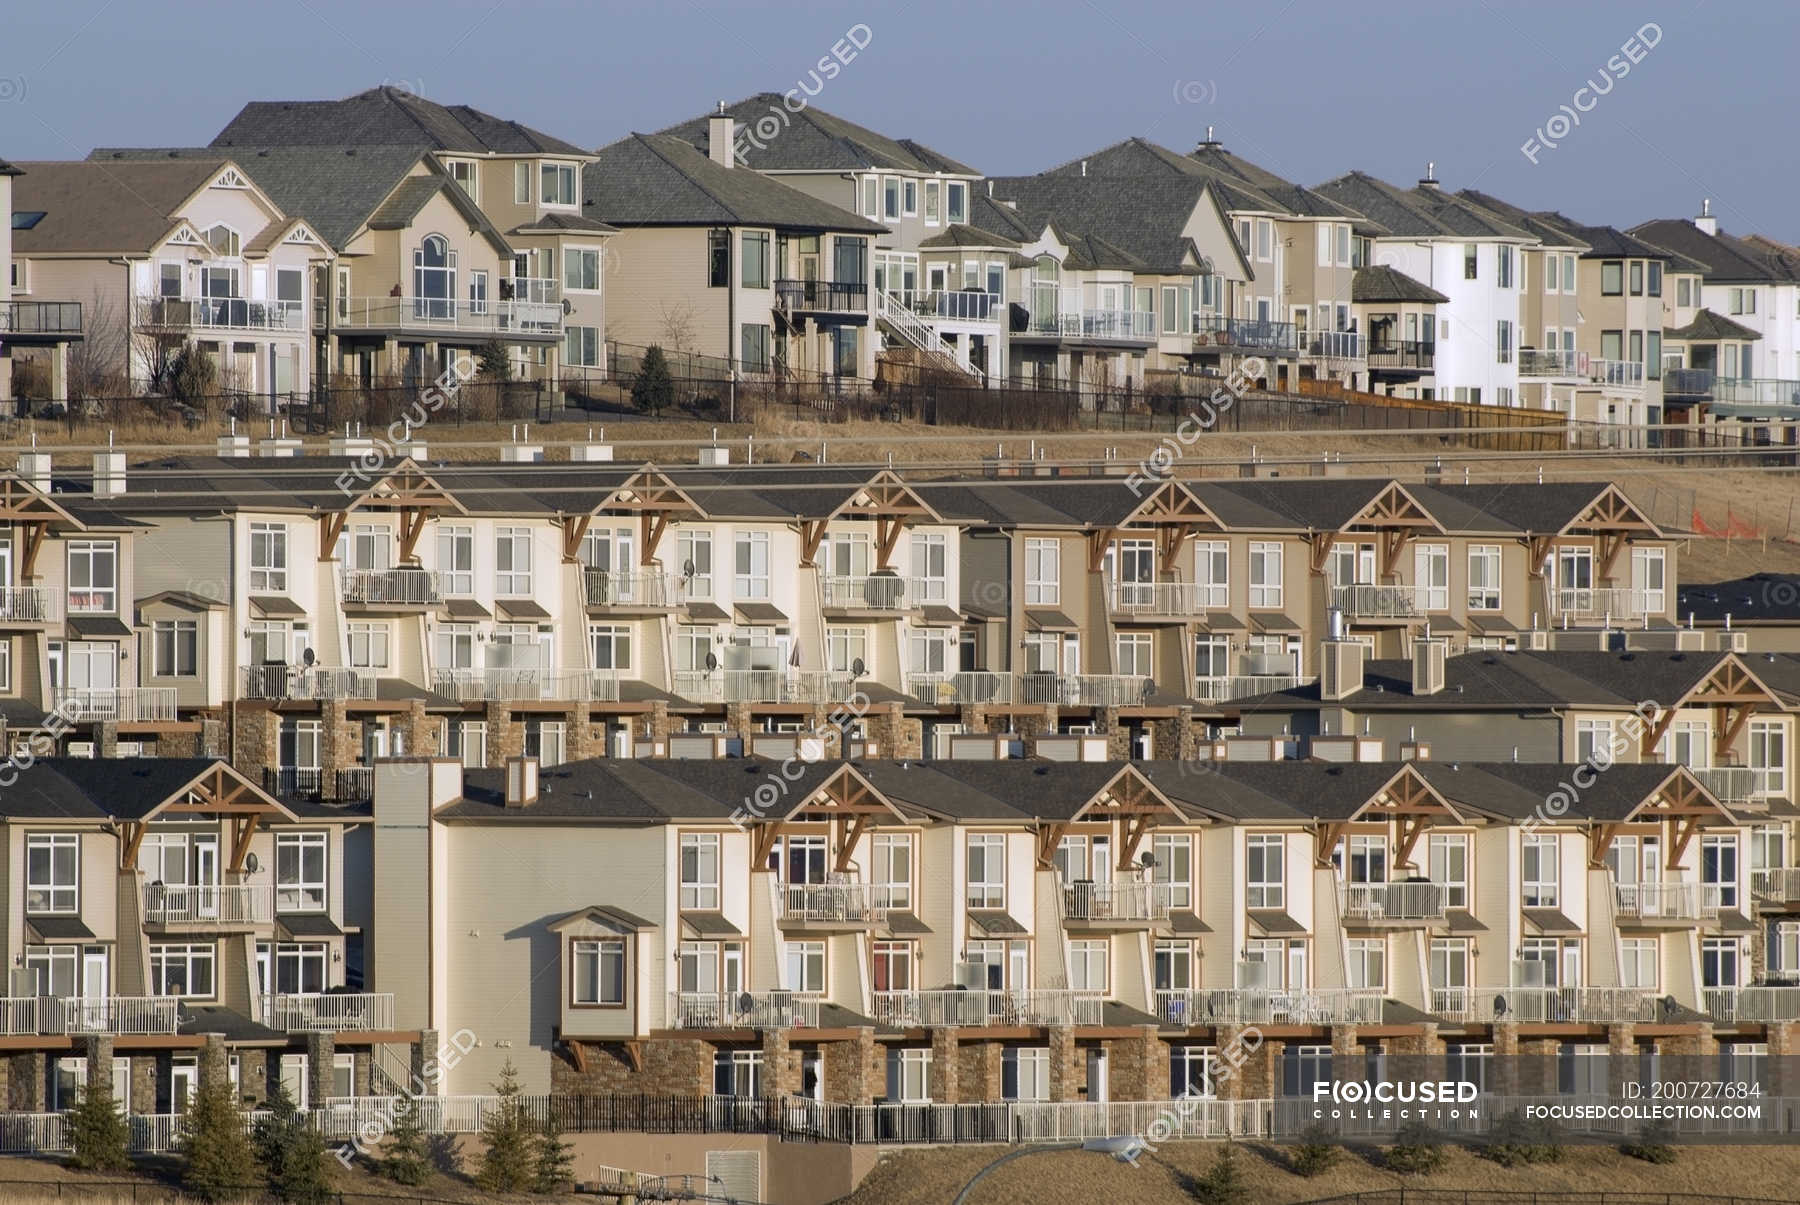 Houses in suburb of Calgary, Alberta, Canada — attraction, architecture -  Stock Photo | #200727684